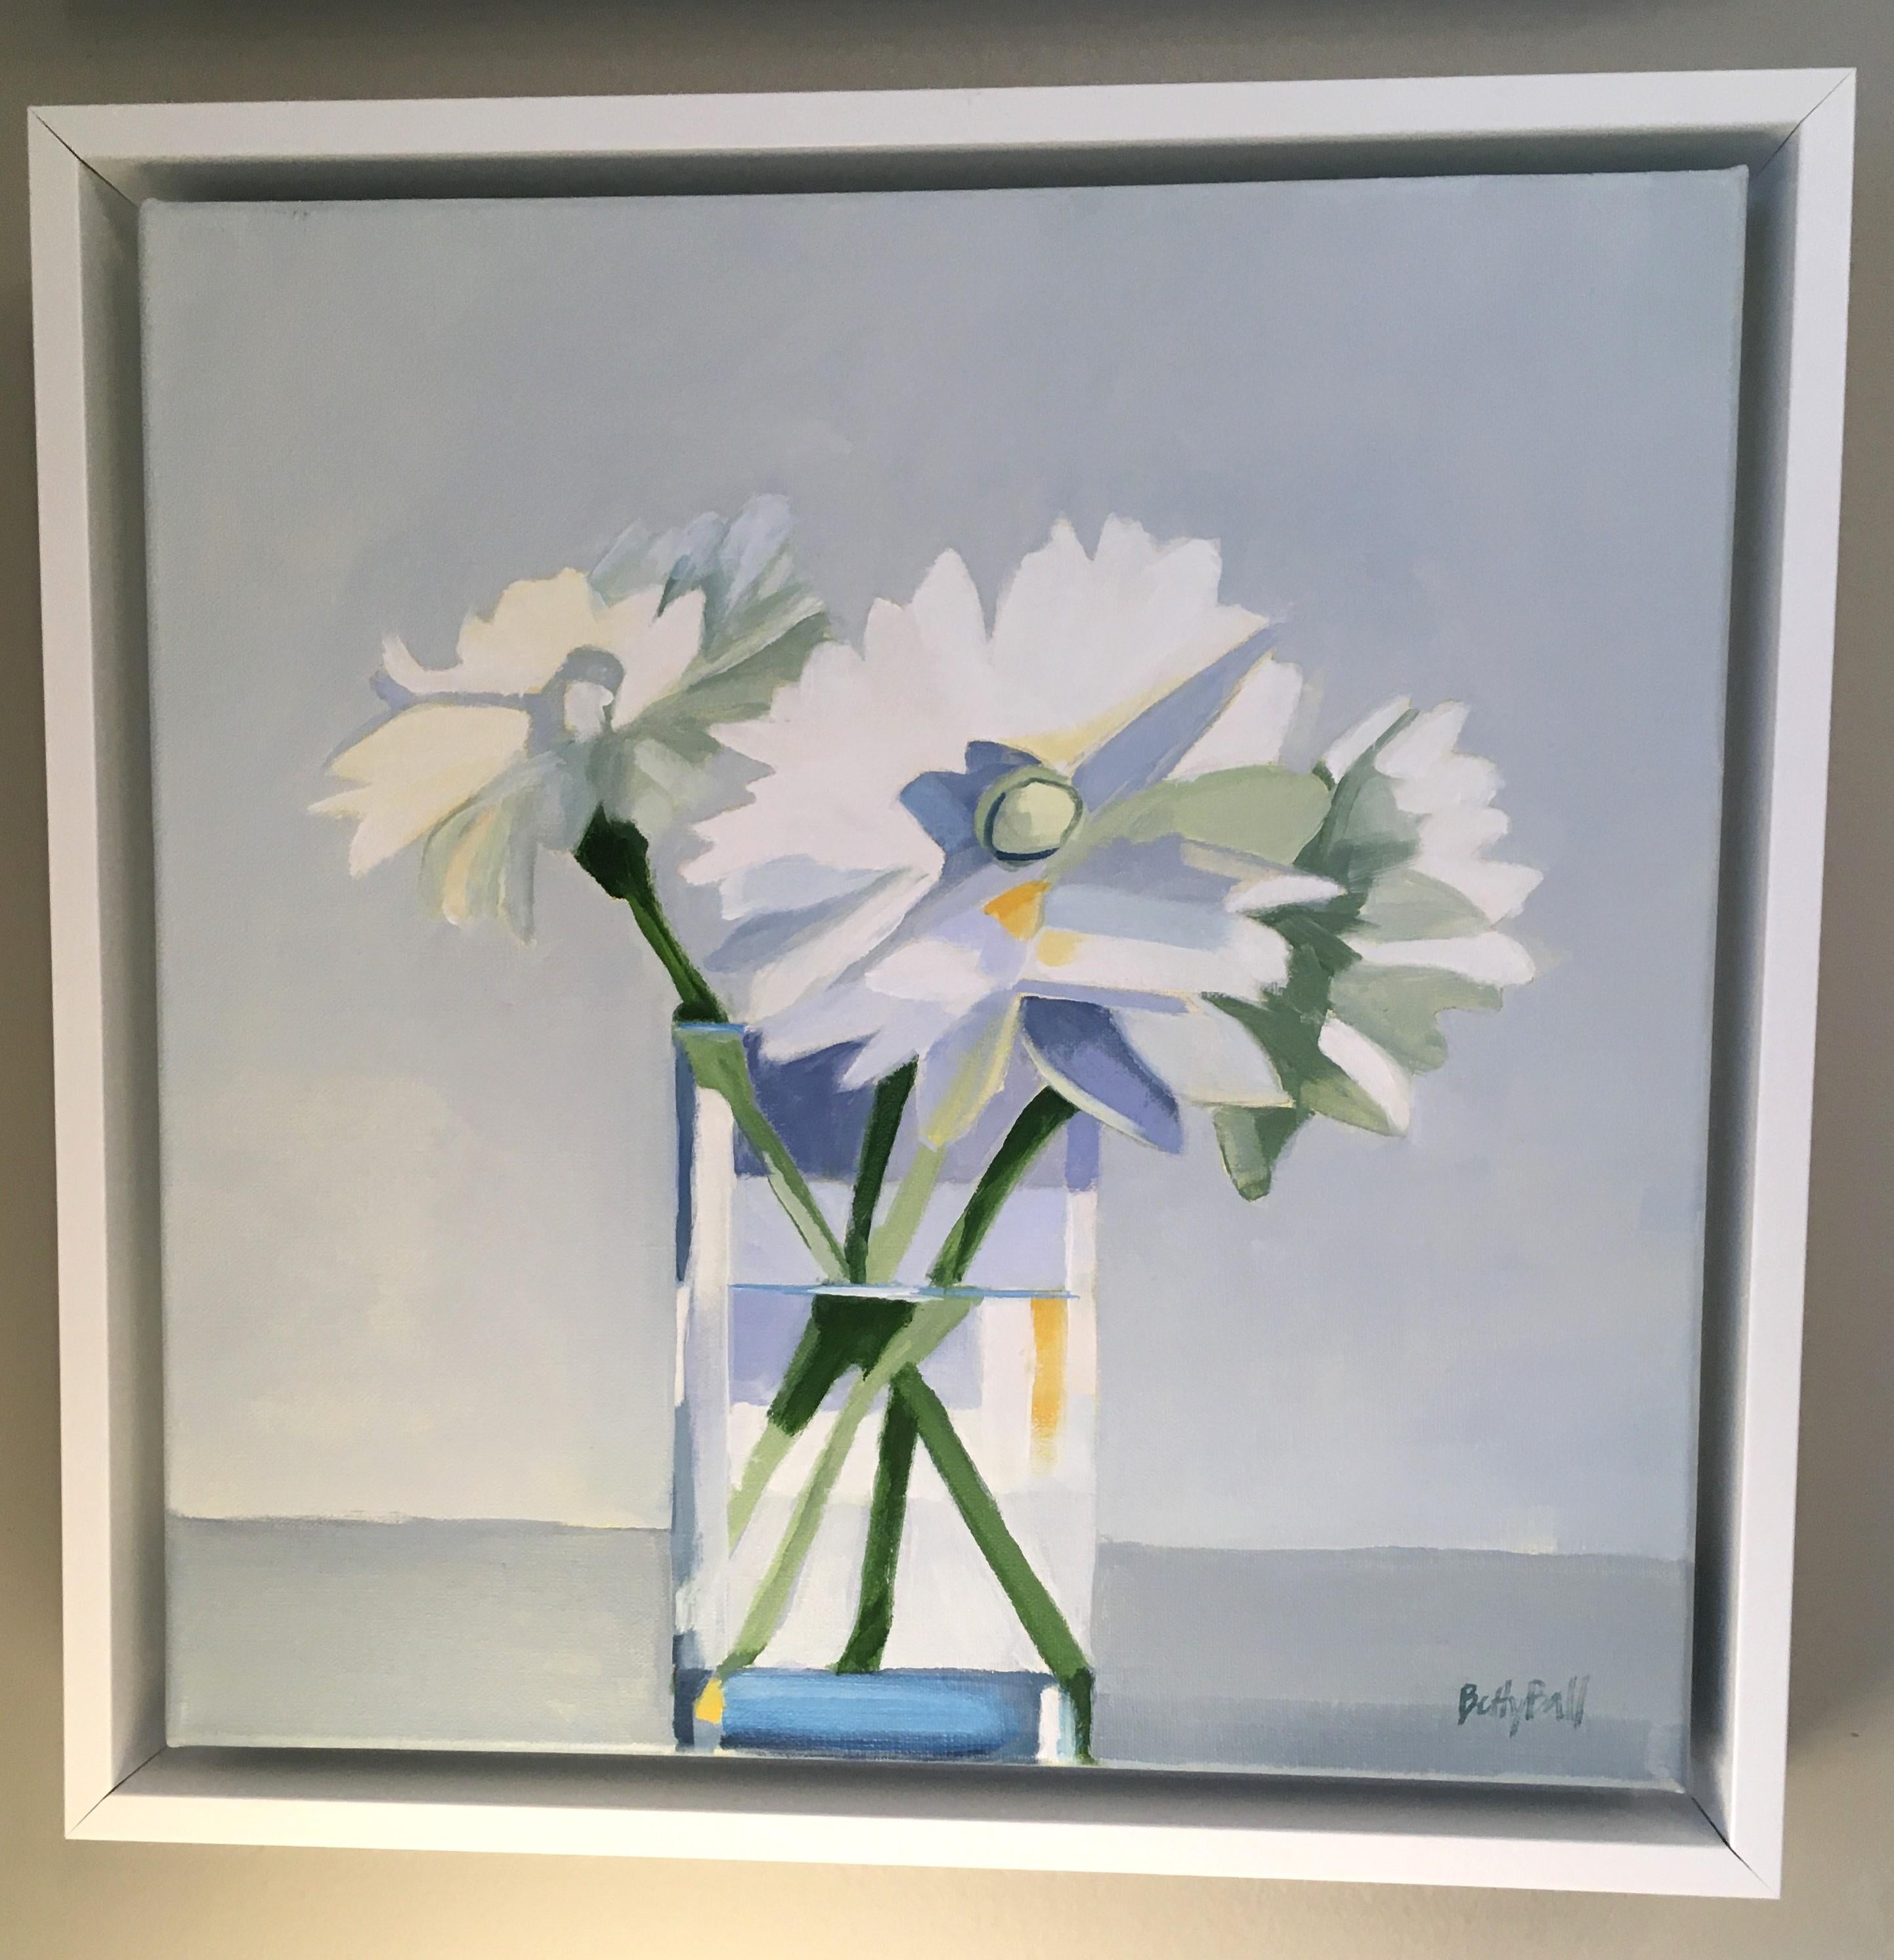 Marguerite by Betty Ball is part of her Flower series.  It is Oil on Linen, 12x12.  It is framed to 13.5 x 13.5  It is $875.  It is a beautiful group of flowers in a vase with water.  A perfect Mother's day gift of forever flowers.

Betty Ball